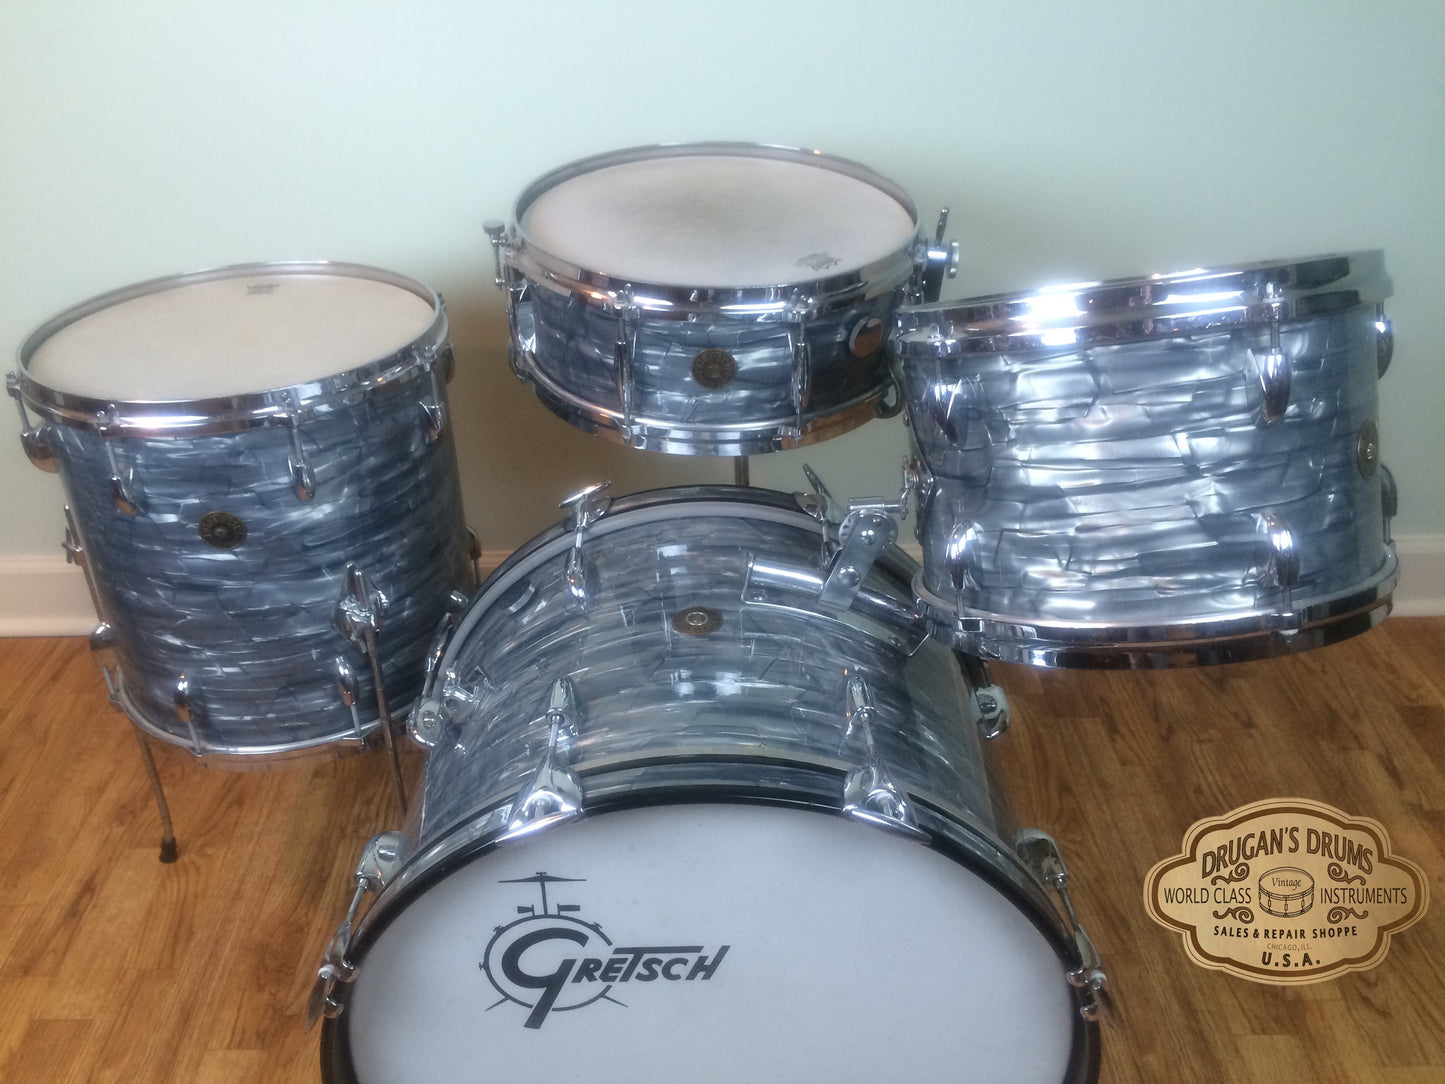 Gretsch 1960's Progressive Jazz Round Badge Outfit in Midnight Blue Pearl 20/12/14/5.5x14 Snare